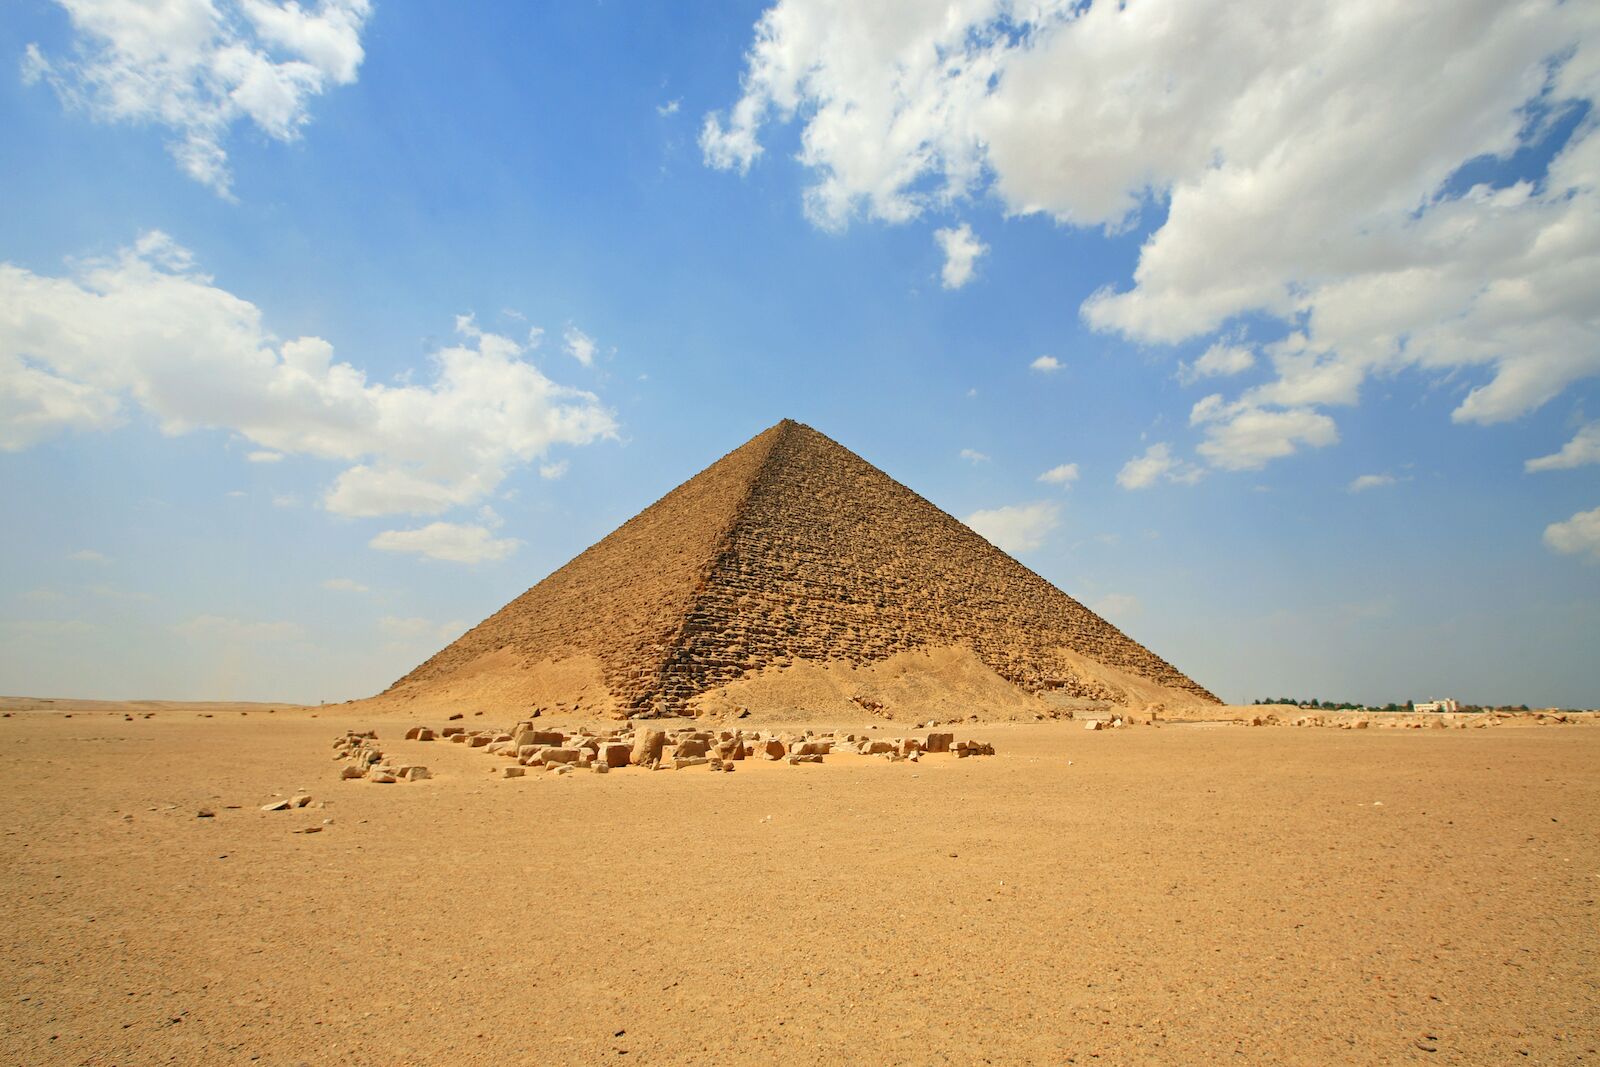 The Red Pyramid. What's inside this pyramid?